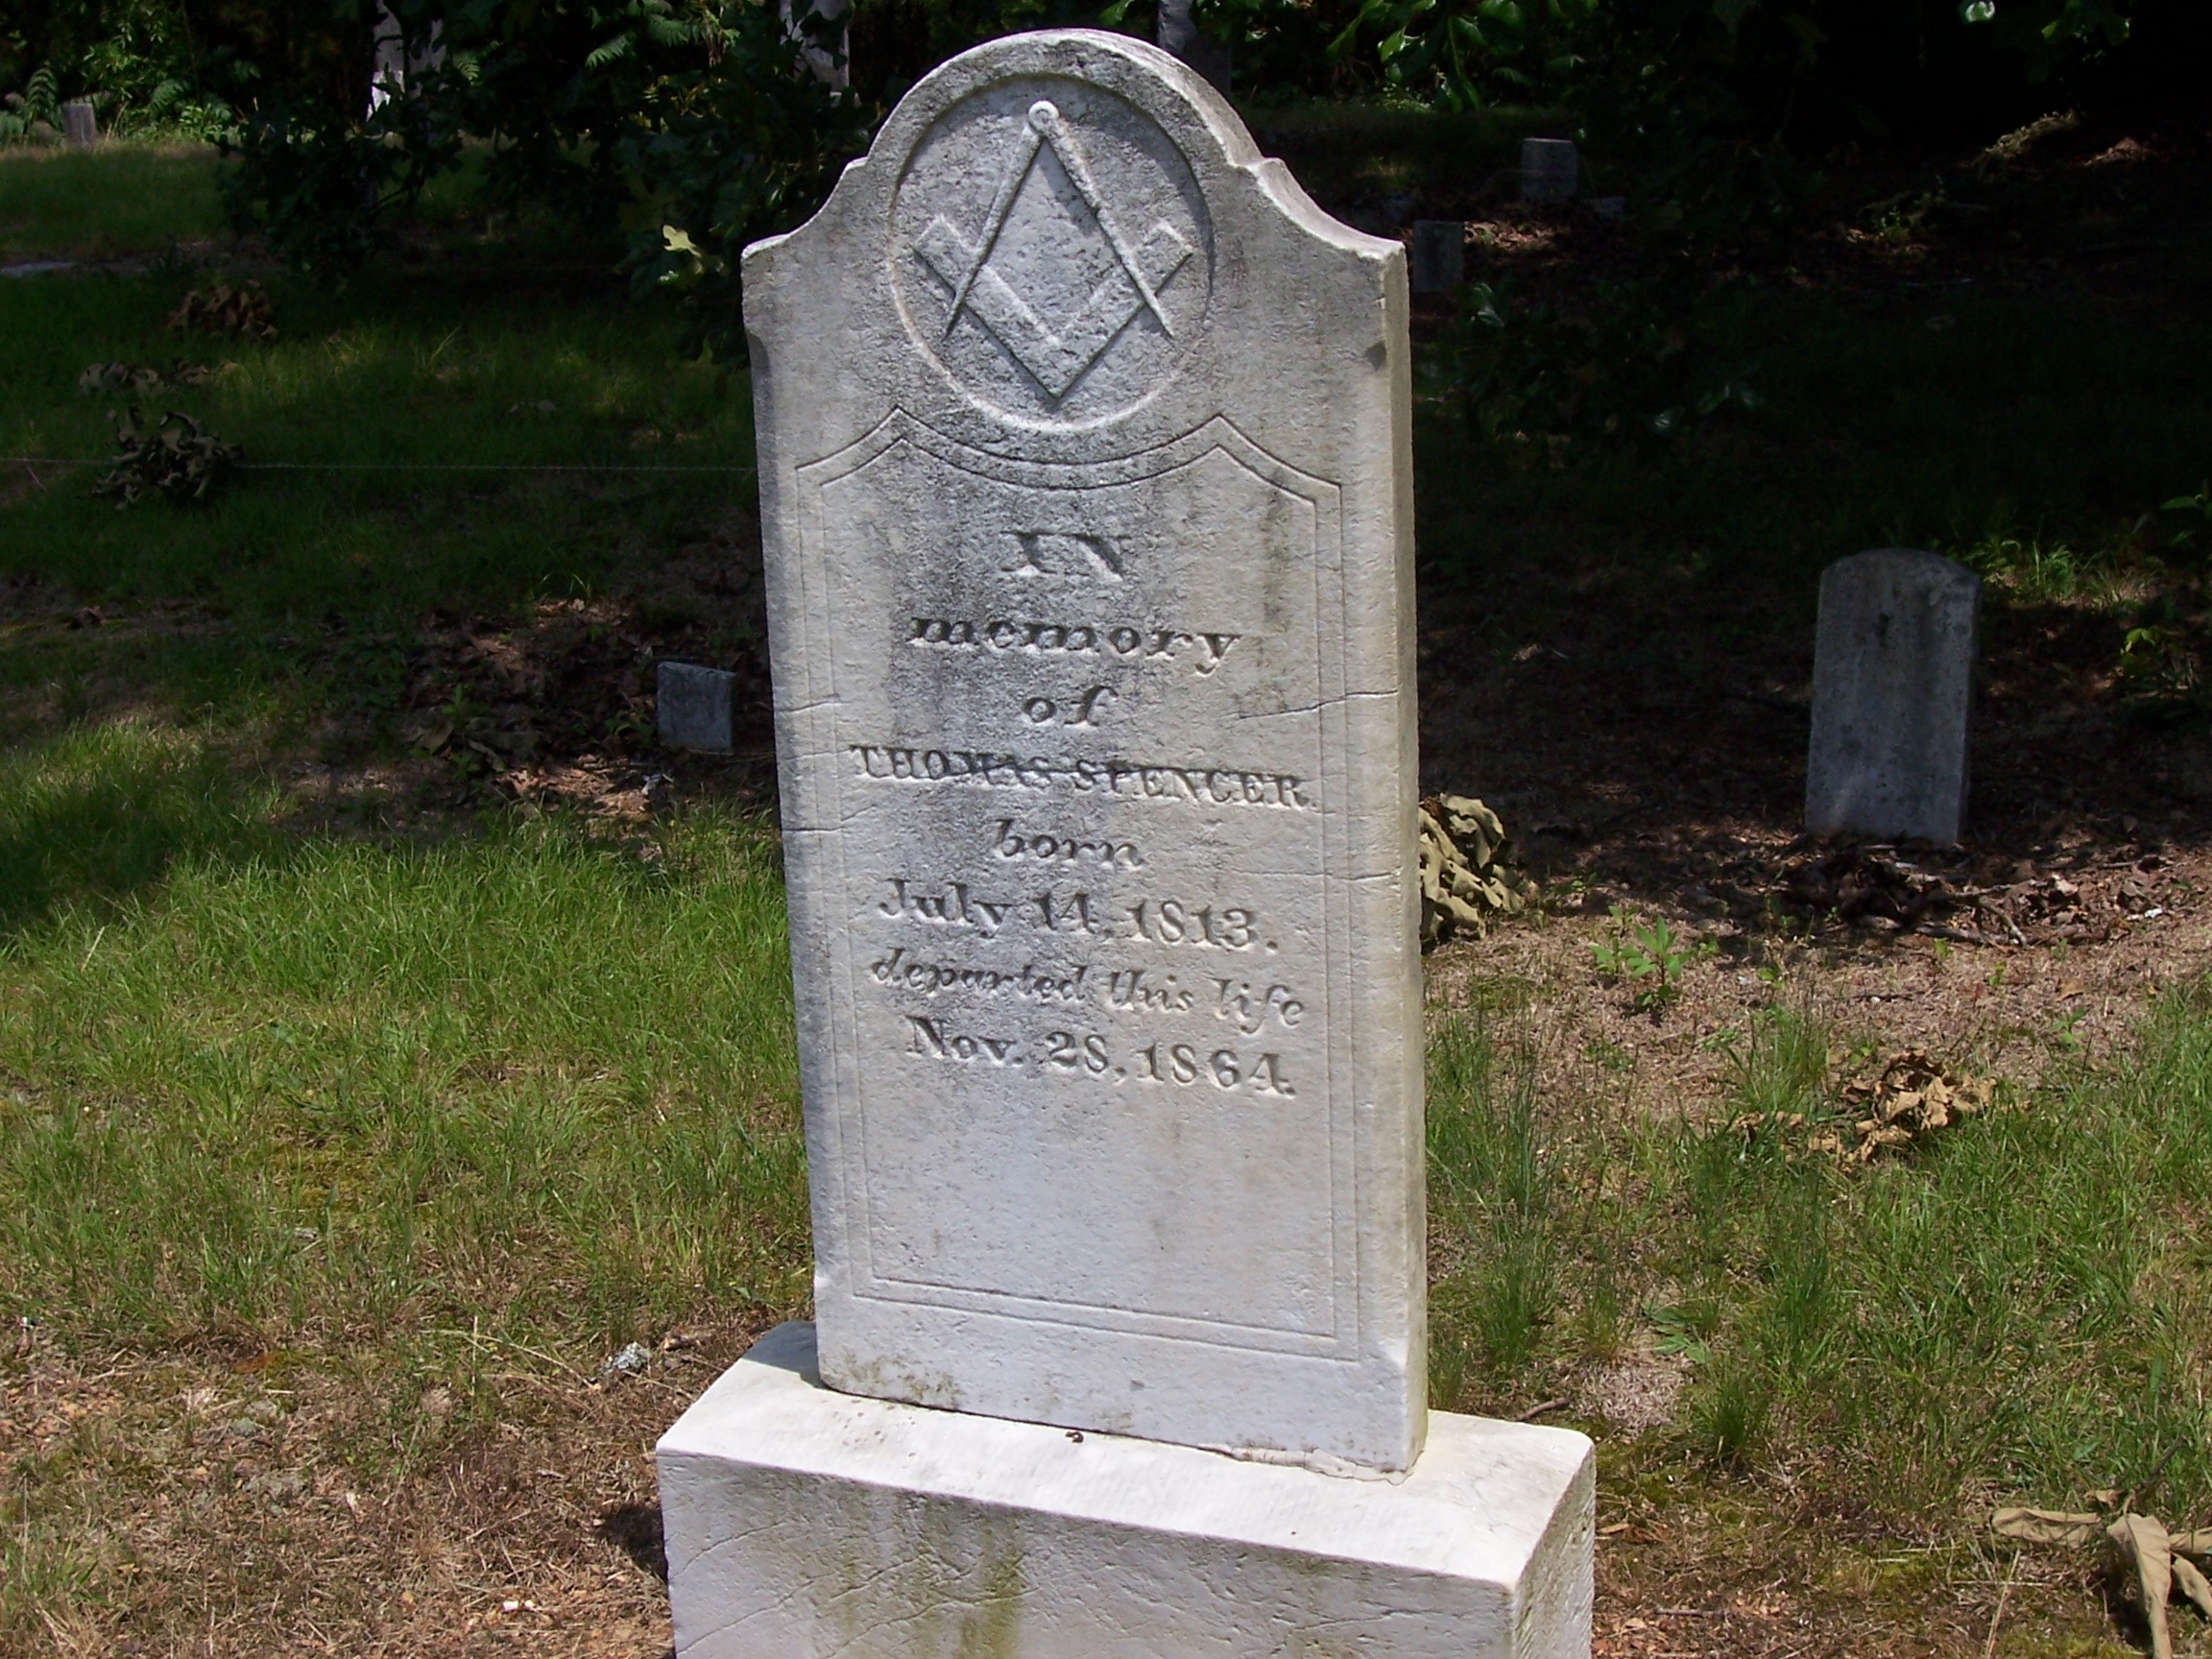 Headstone of Thomas J. Spencer, our Great Great Great Grandfather, father of Fannie Spencer Smith, in the cemetery at the Bethlehem Baptist Church in Sonoraville, Gordon County, 
Georgia